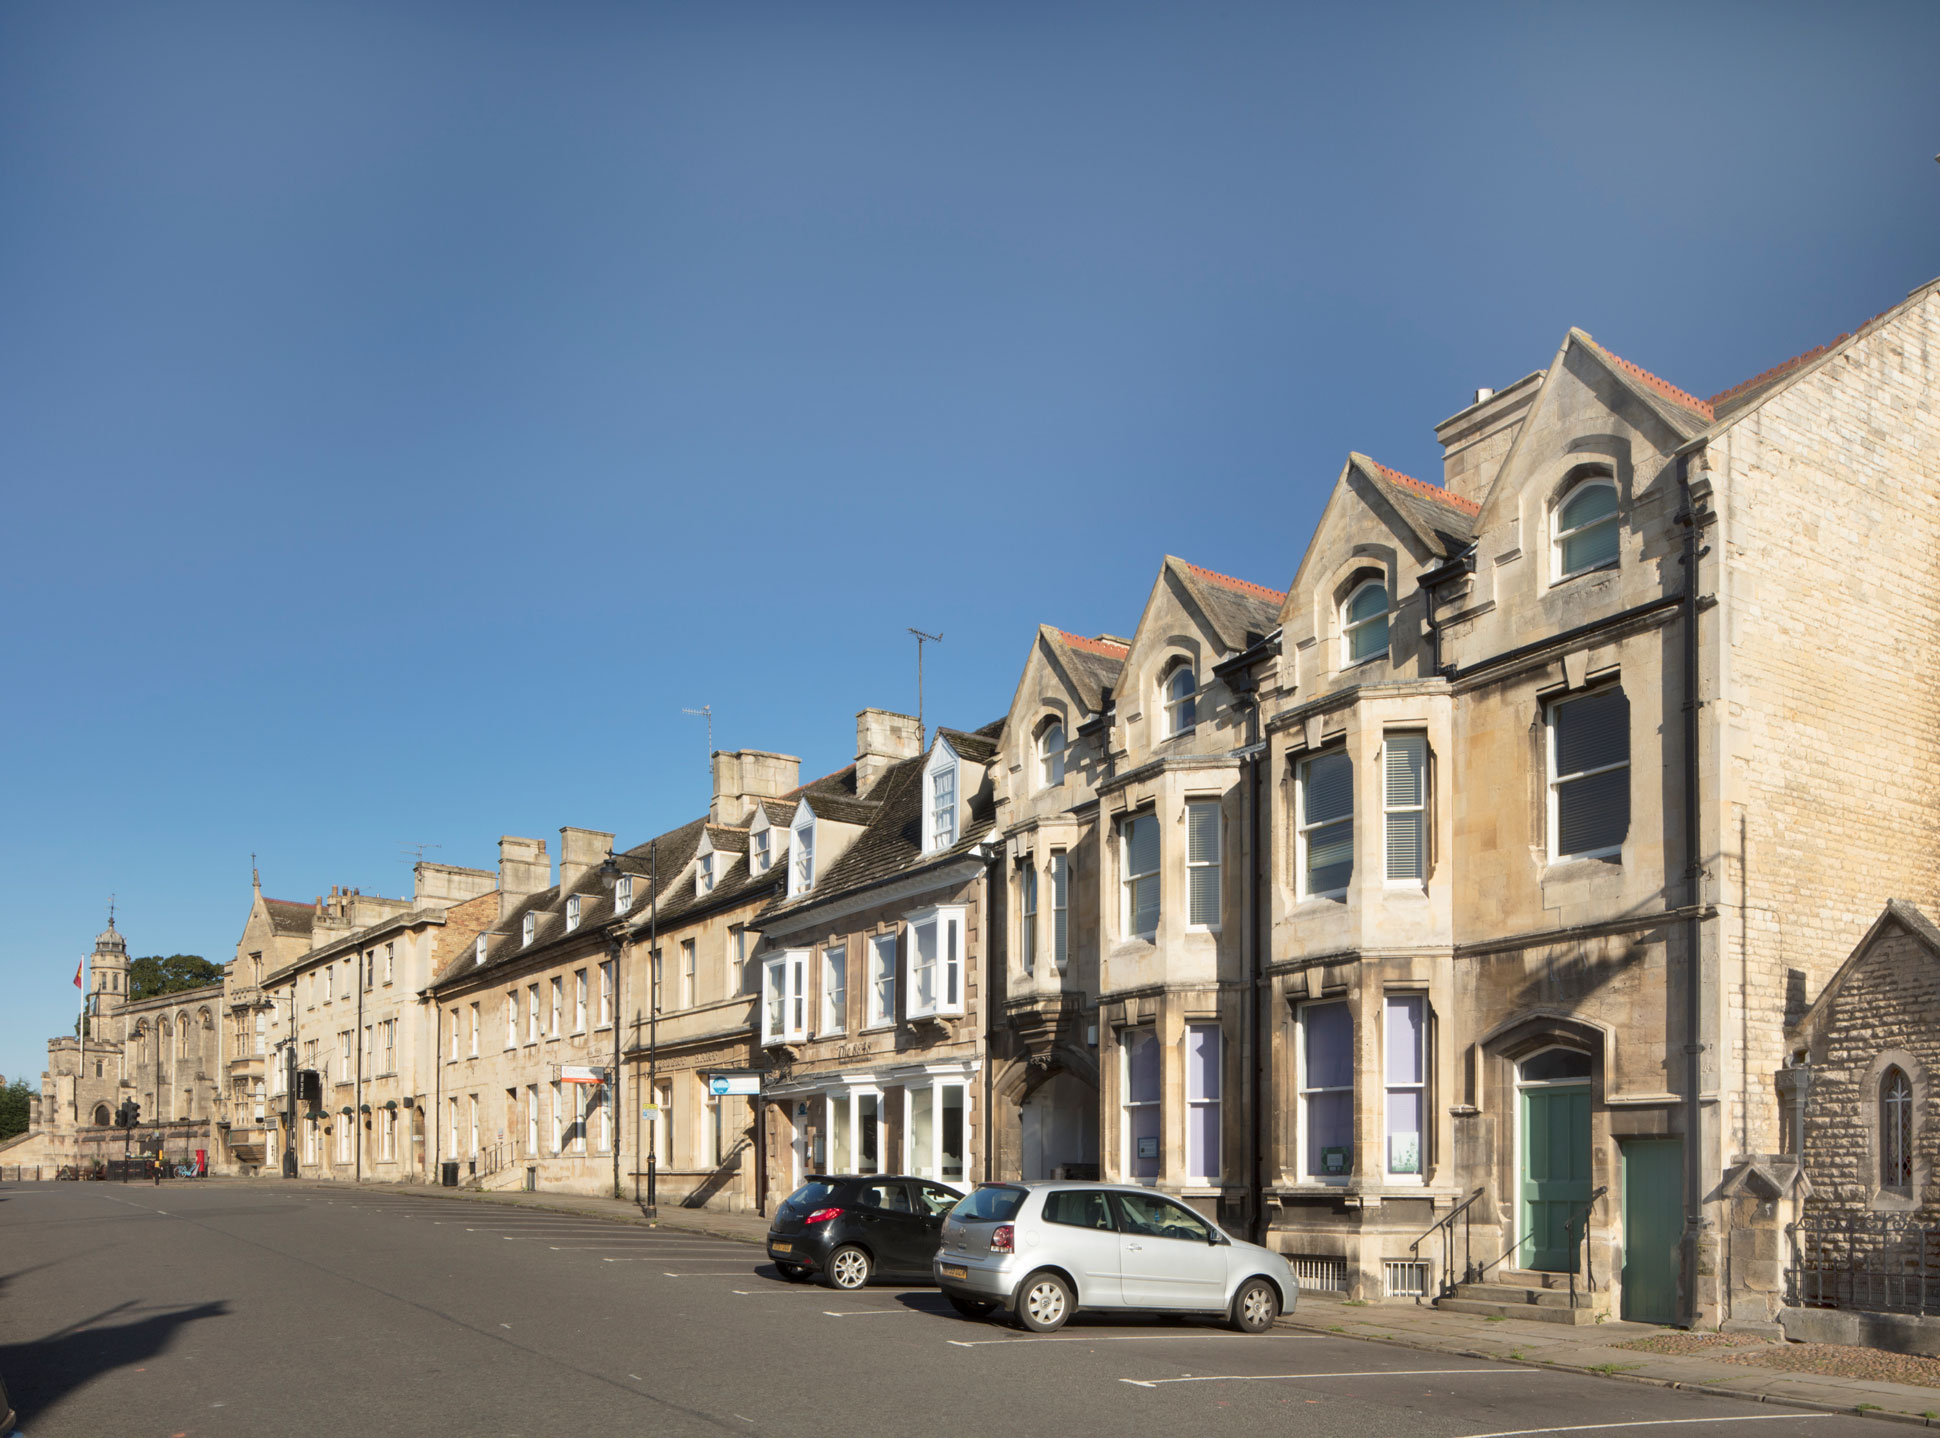 Colour photo showing a view along a row of three-storey 19th century buildings built in a light ashlar stone. Parking bays line the road in front of the buildings. Two cars are parked out front.